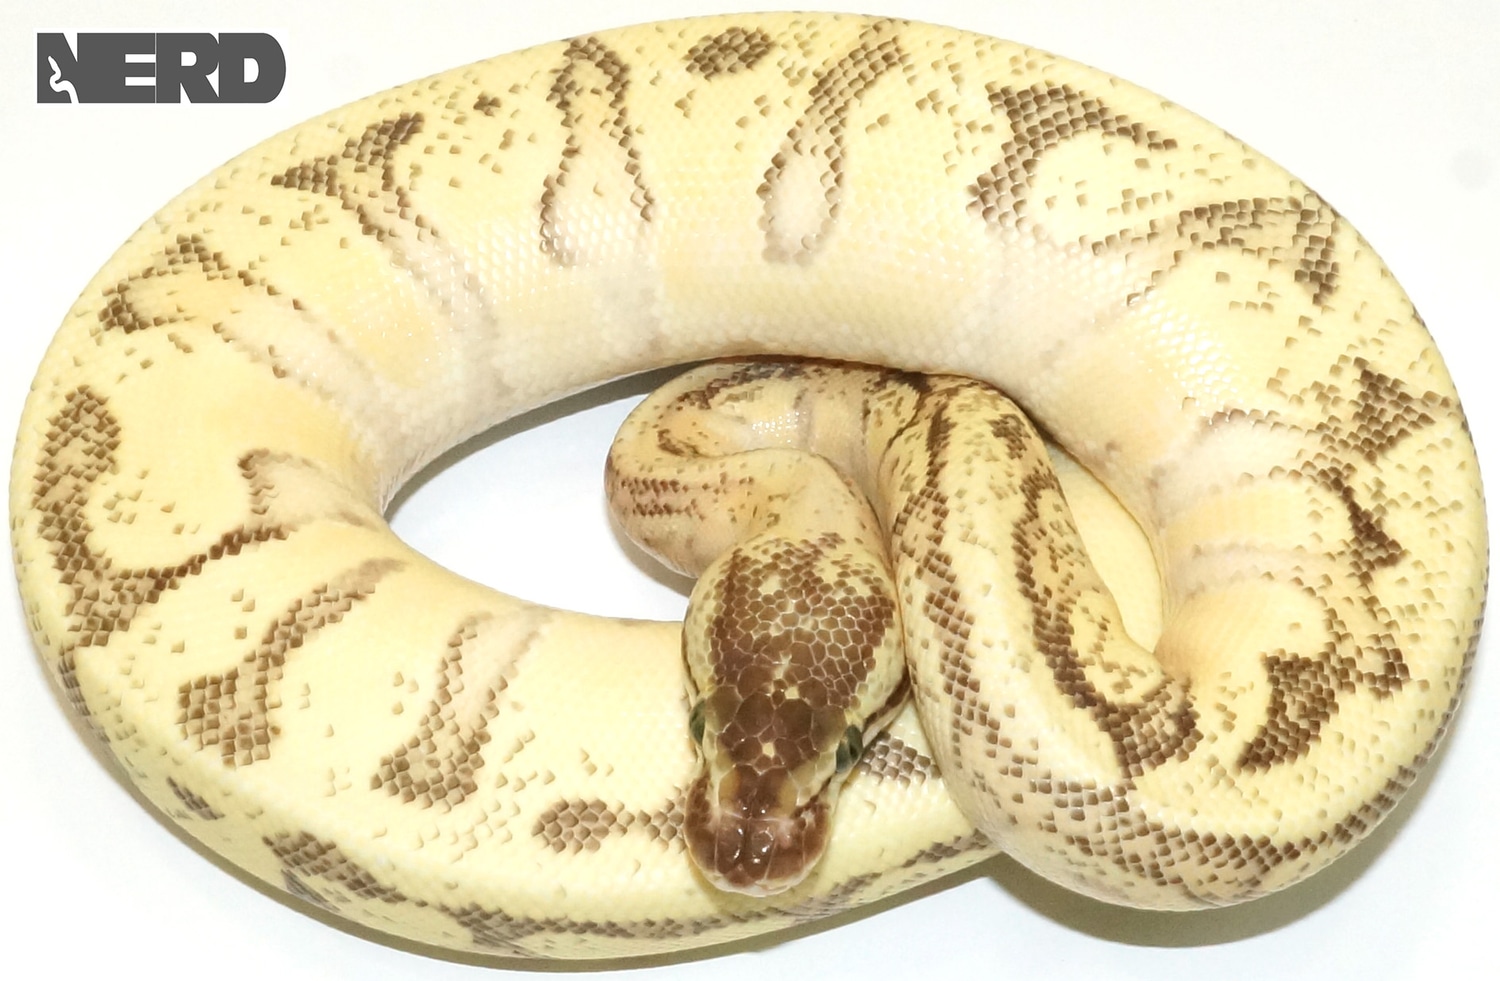 Lucifer Enchi Inferno Ball Python by New England Reptile Distributors